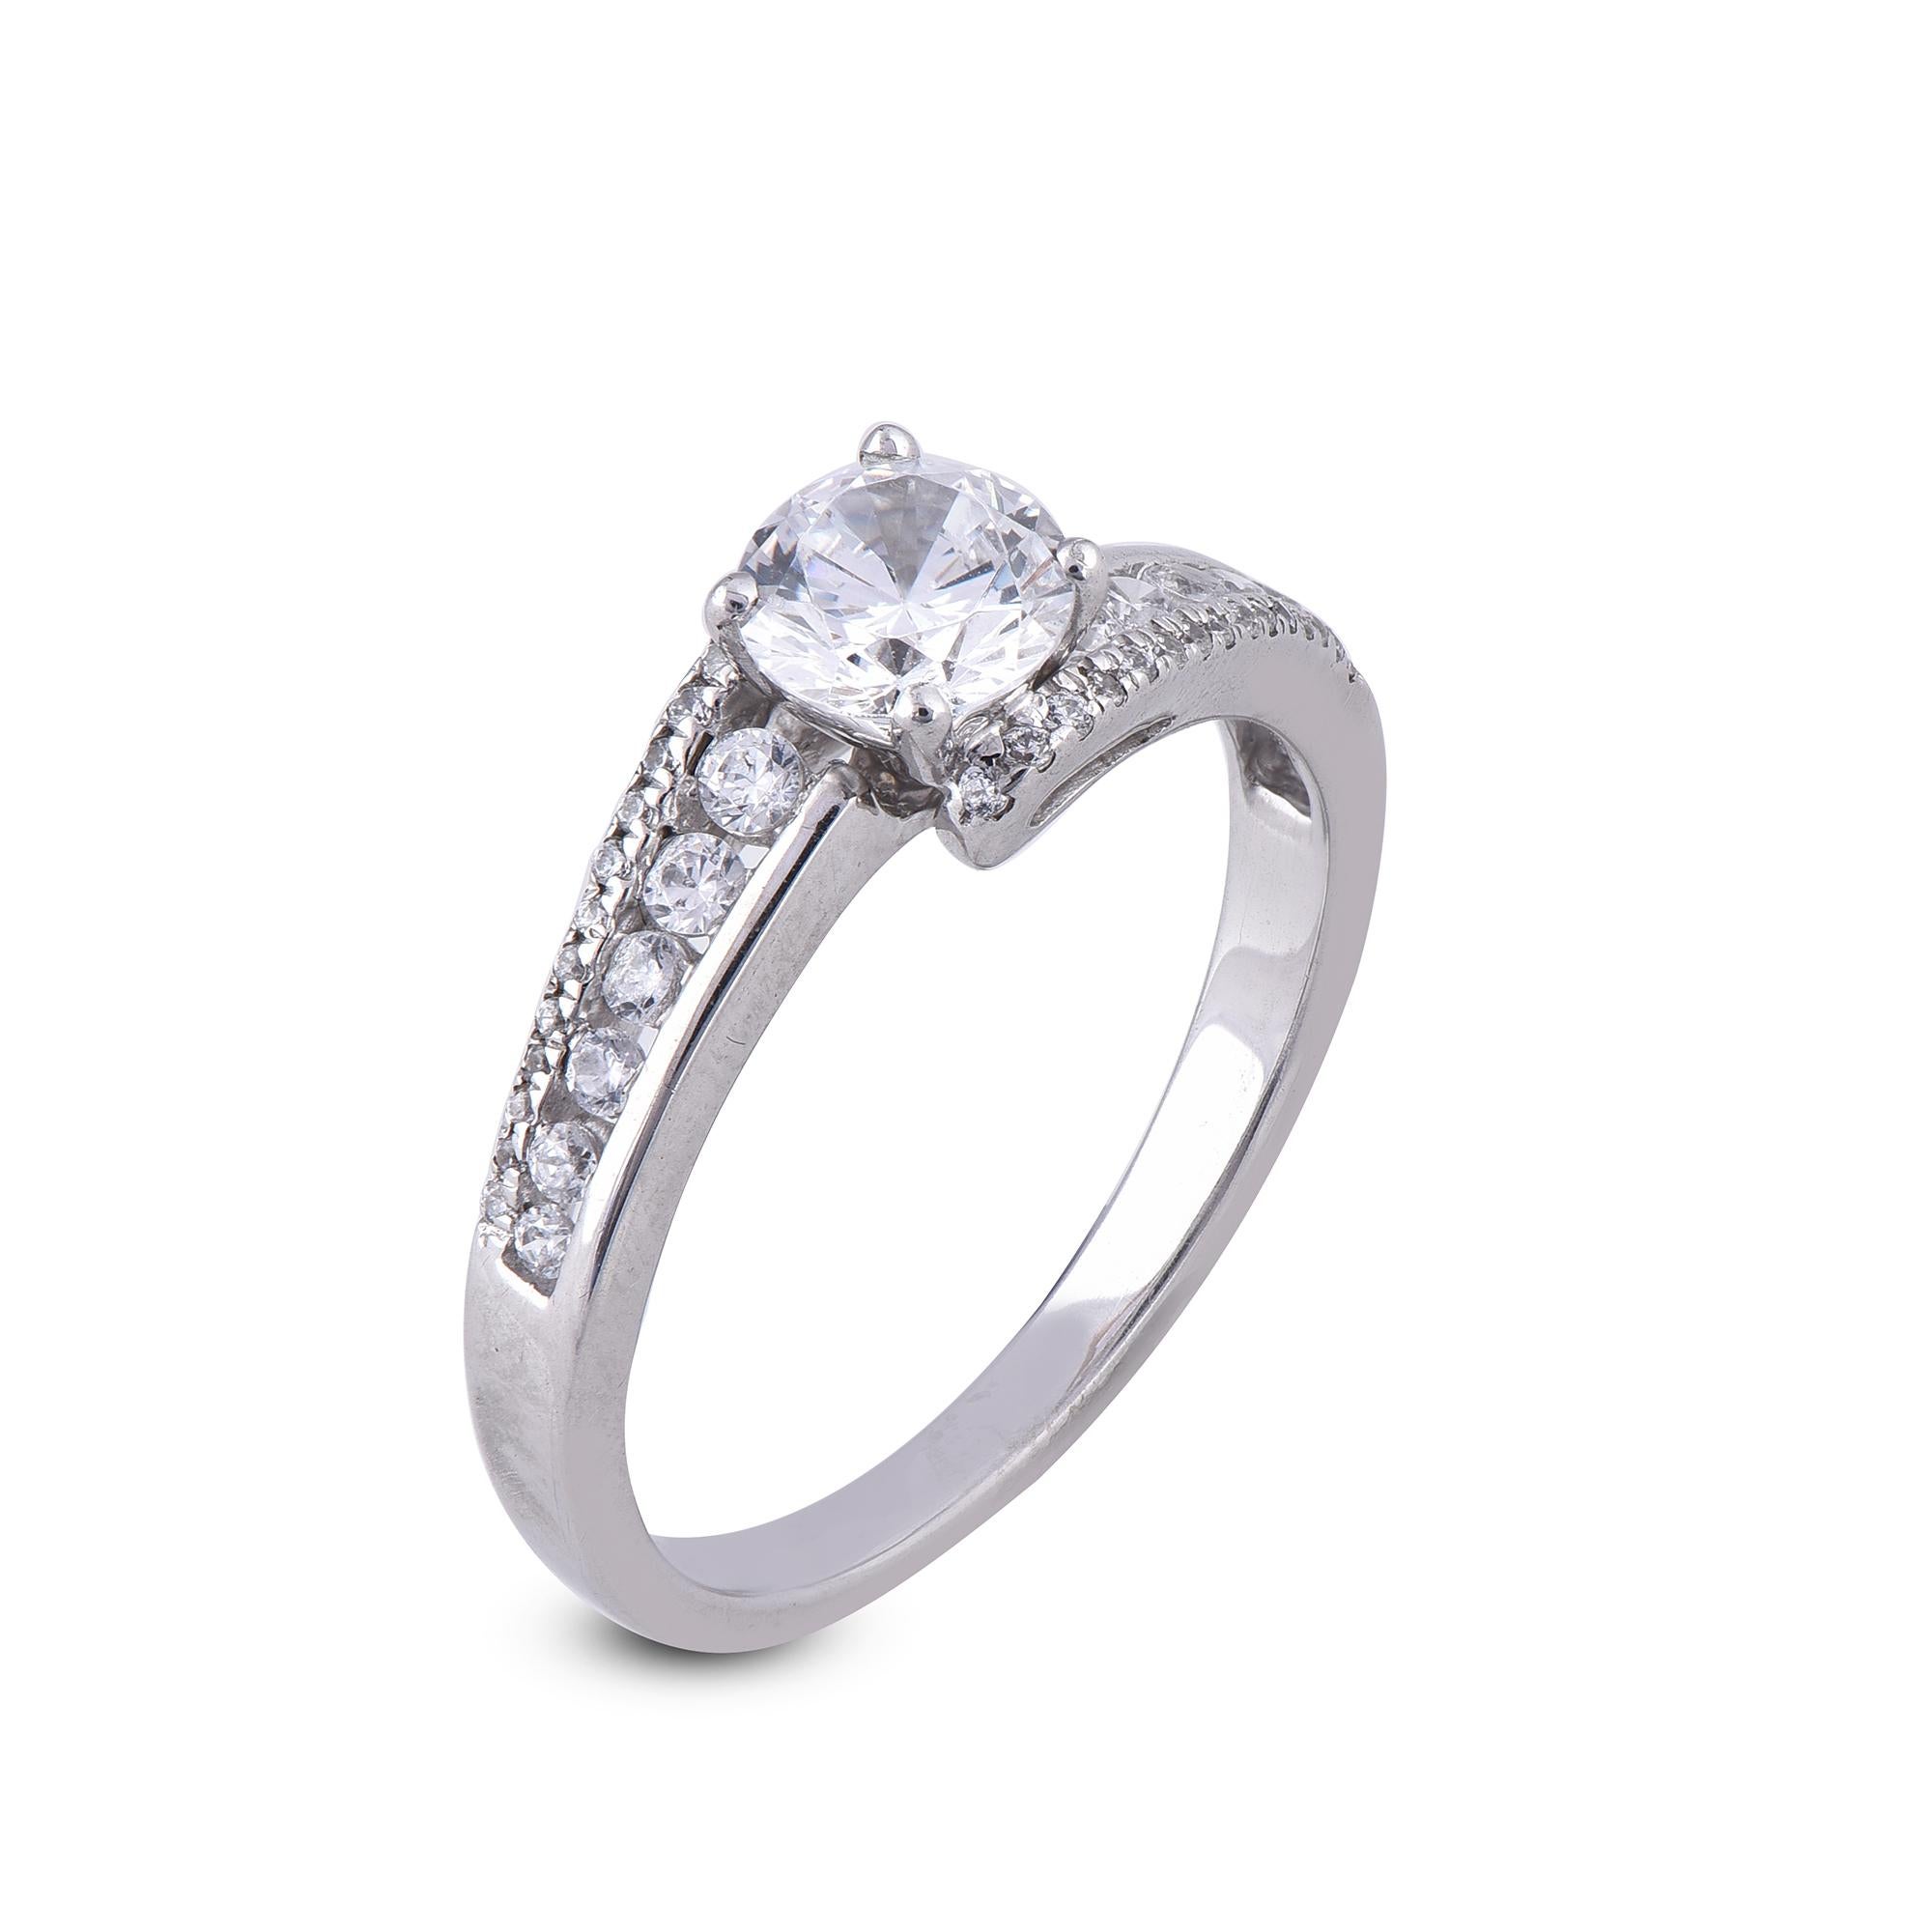 This engagement ring features 0.70 ct of centre stone and 0.30 ct of lined diamonds. Expertly Crafted of sparkling 18 karat white gold in high polish finish and set with 43 sparkling round and cut diamonds set in channel and prong setting, G-H Color